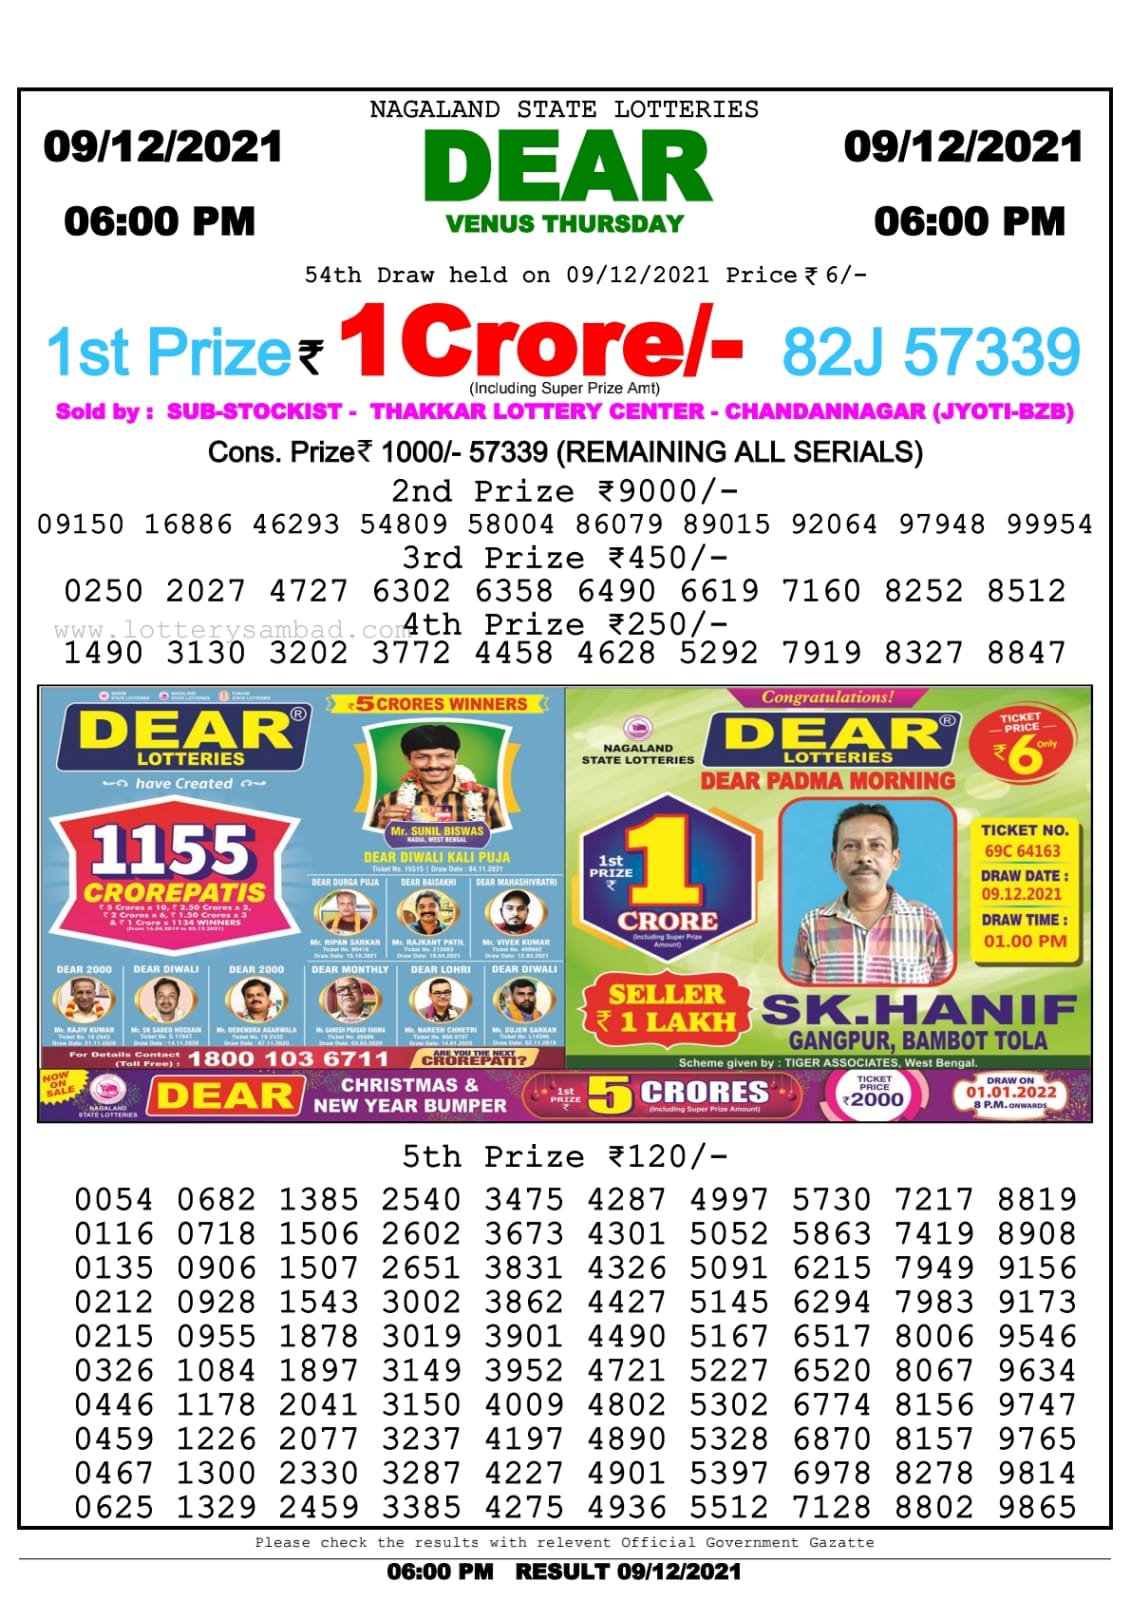 Dear Lottery Nagaland State Lottery Today 6:00 PM 09-12-2021